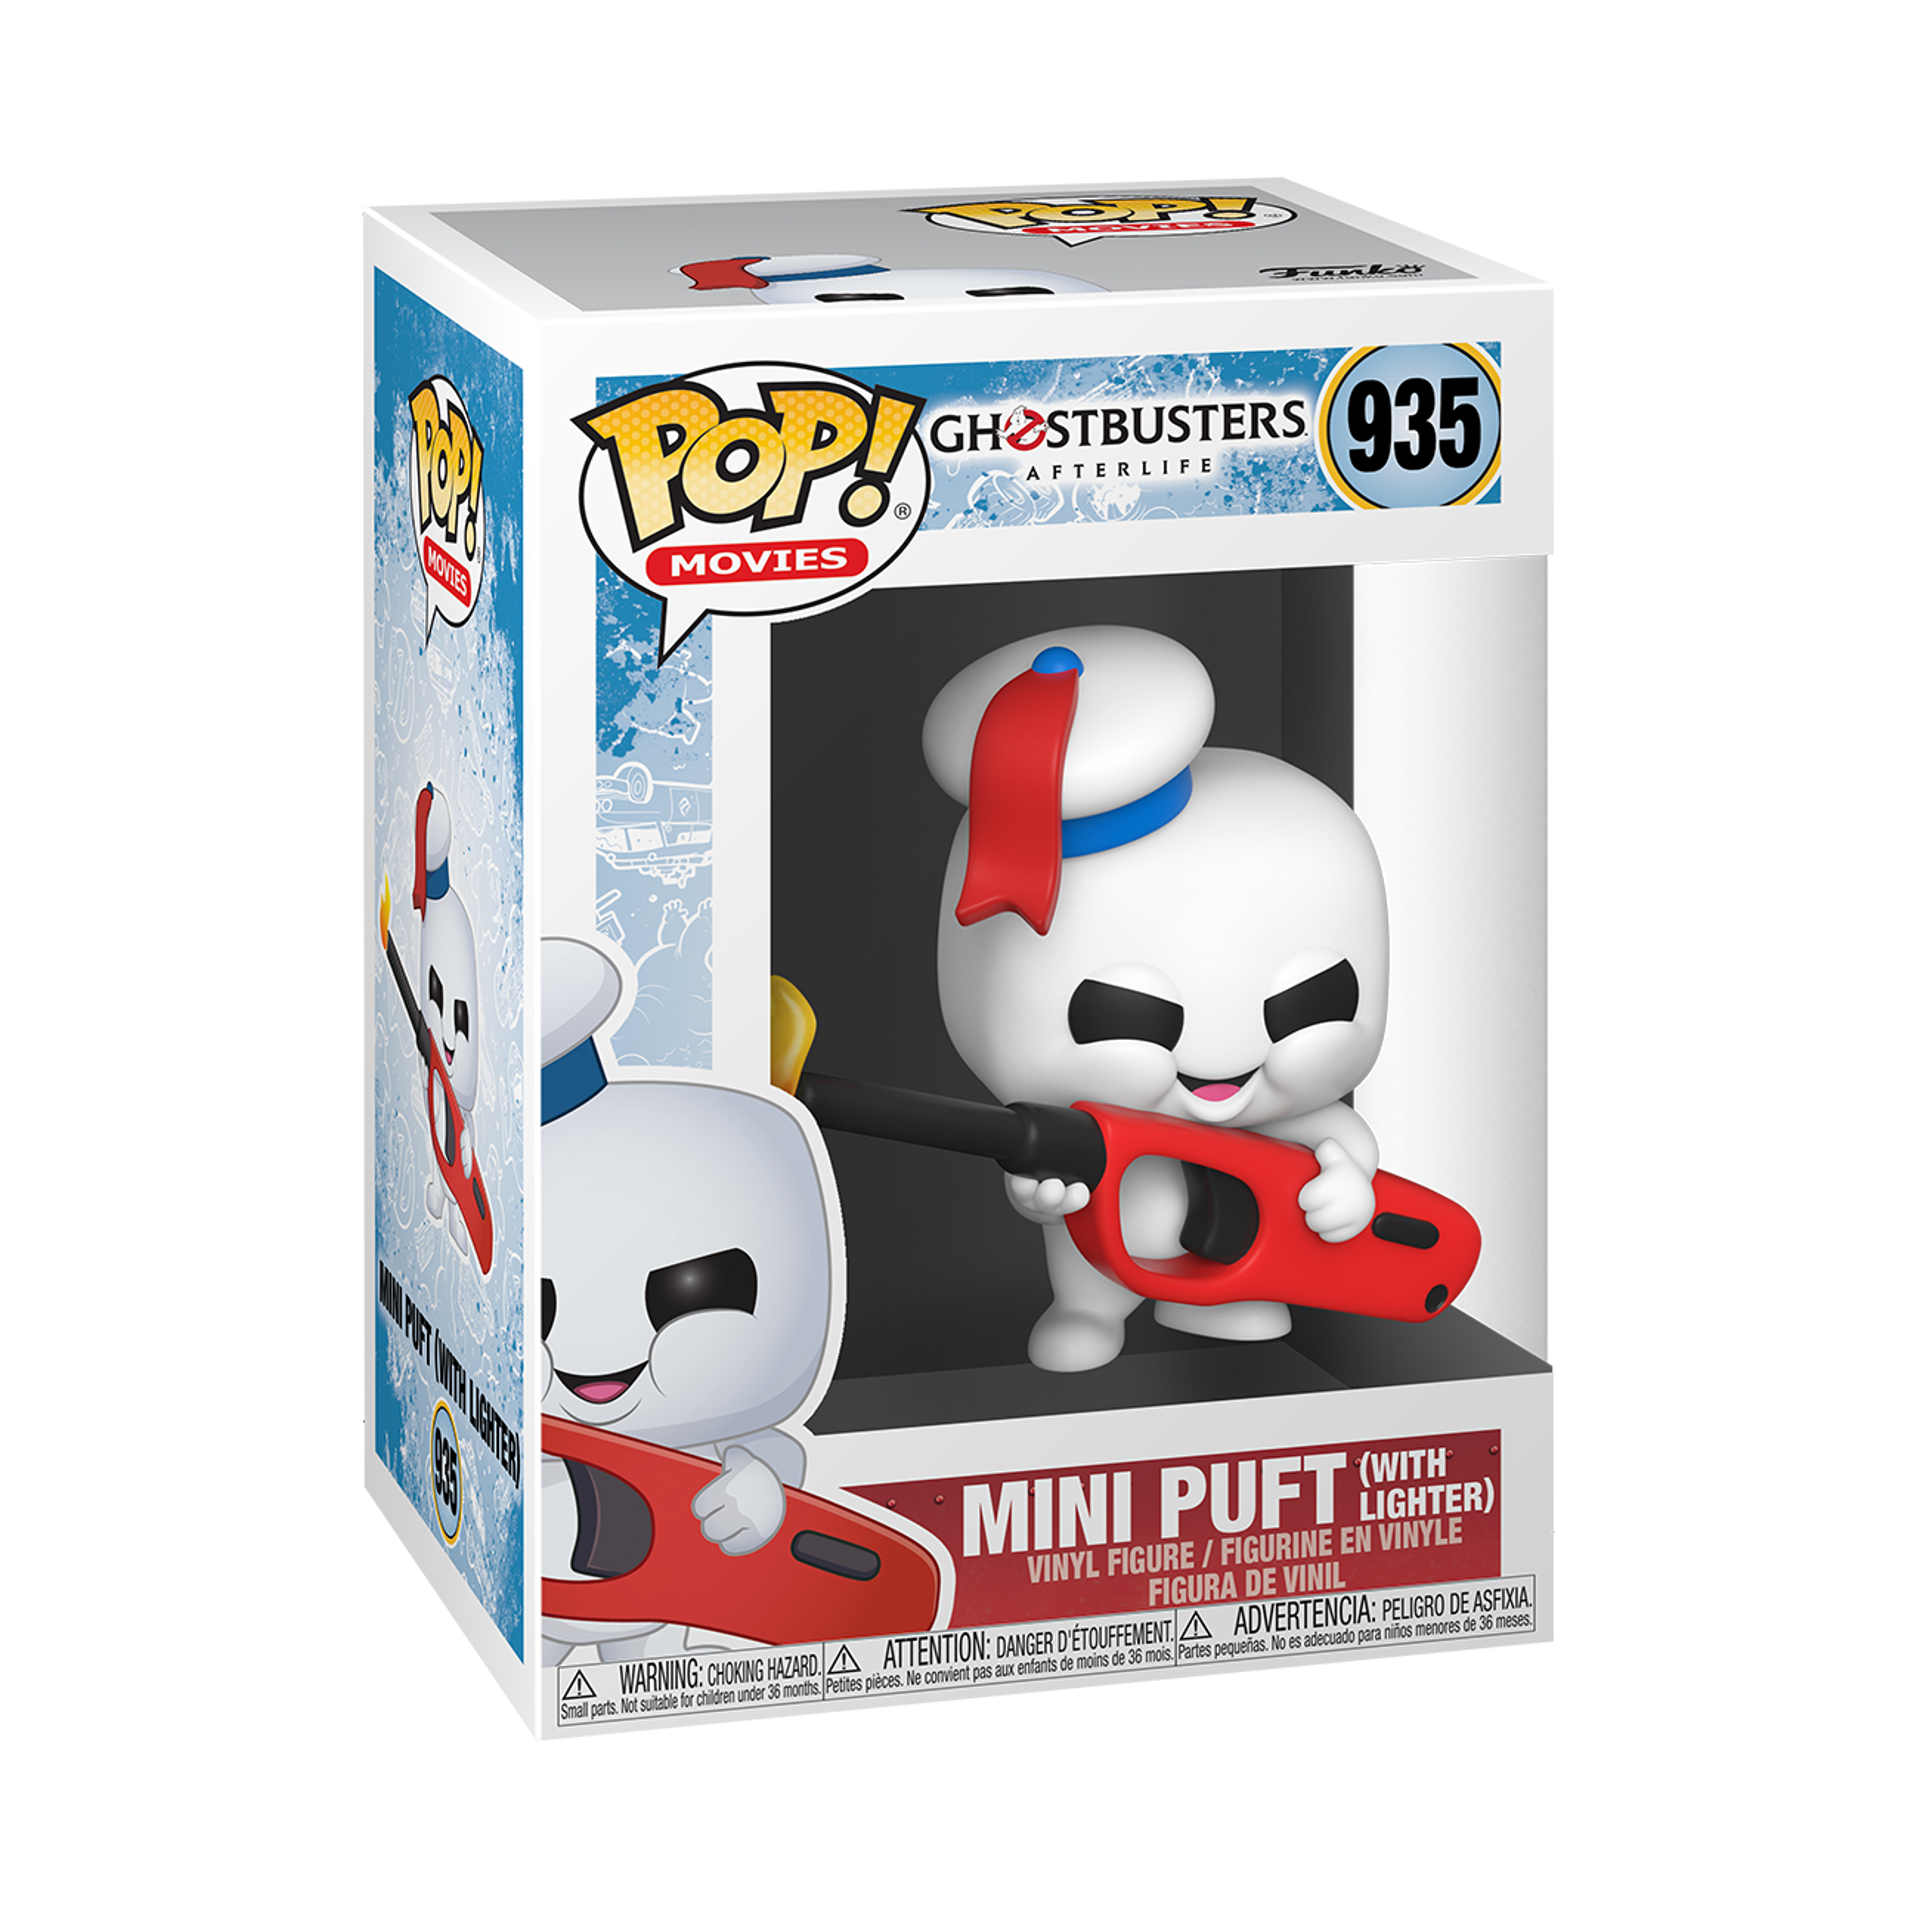 Funko Pop! Movies Ghostbusters: Afterlife - Mini Puft (with Lighter)